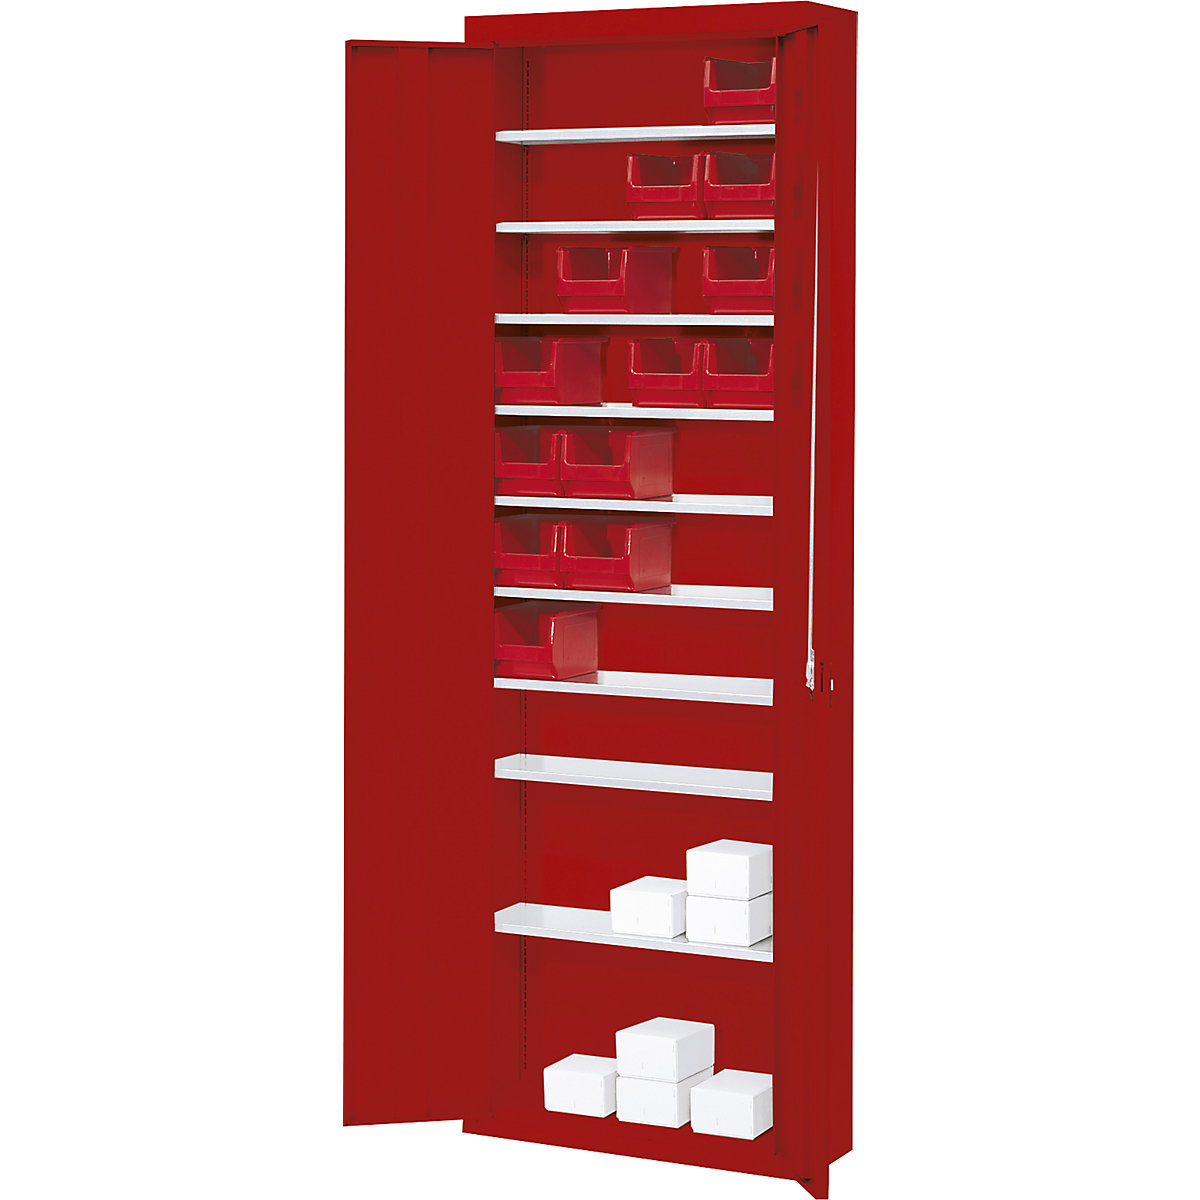 Storage cupboard, without open fronted storage bins – mauser